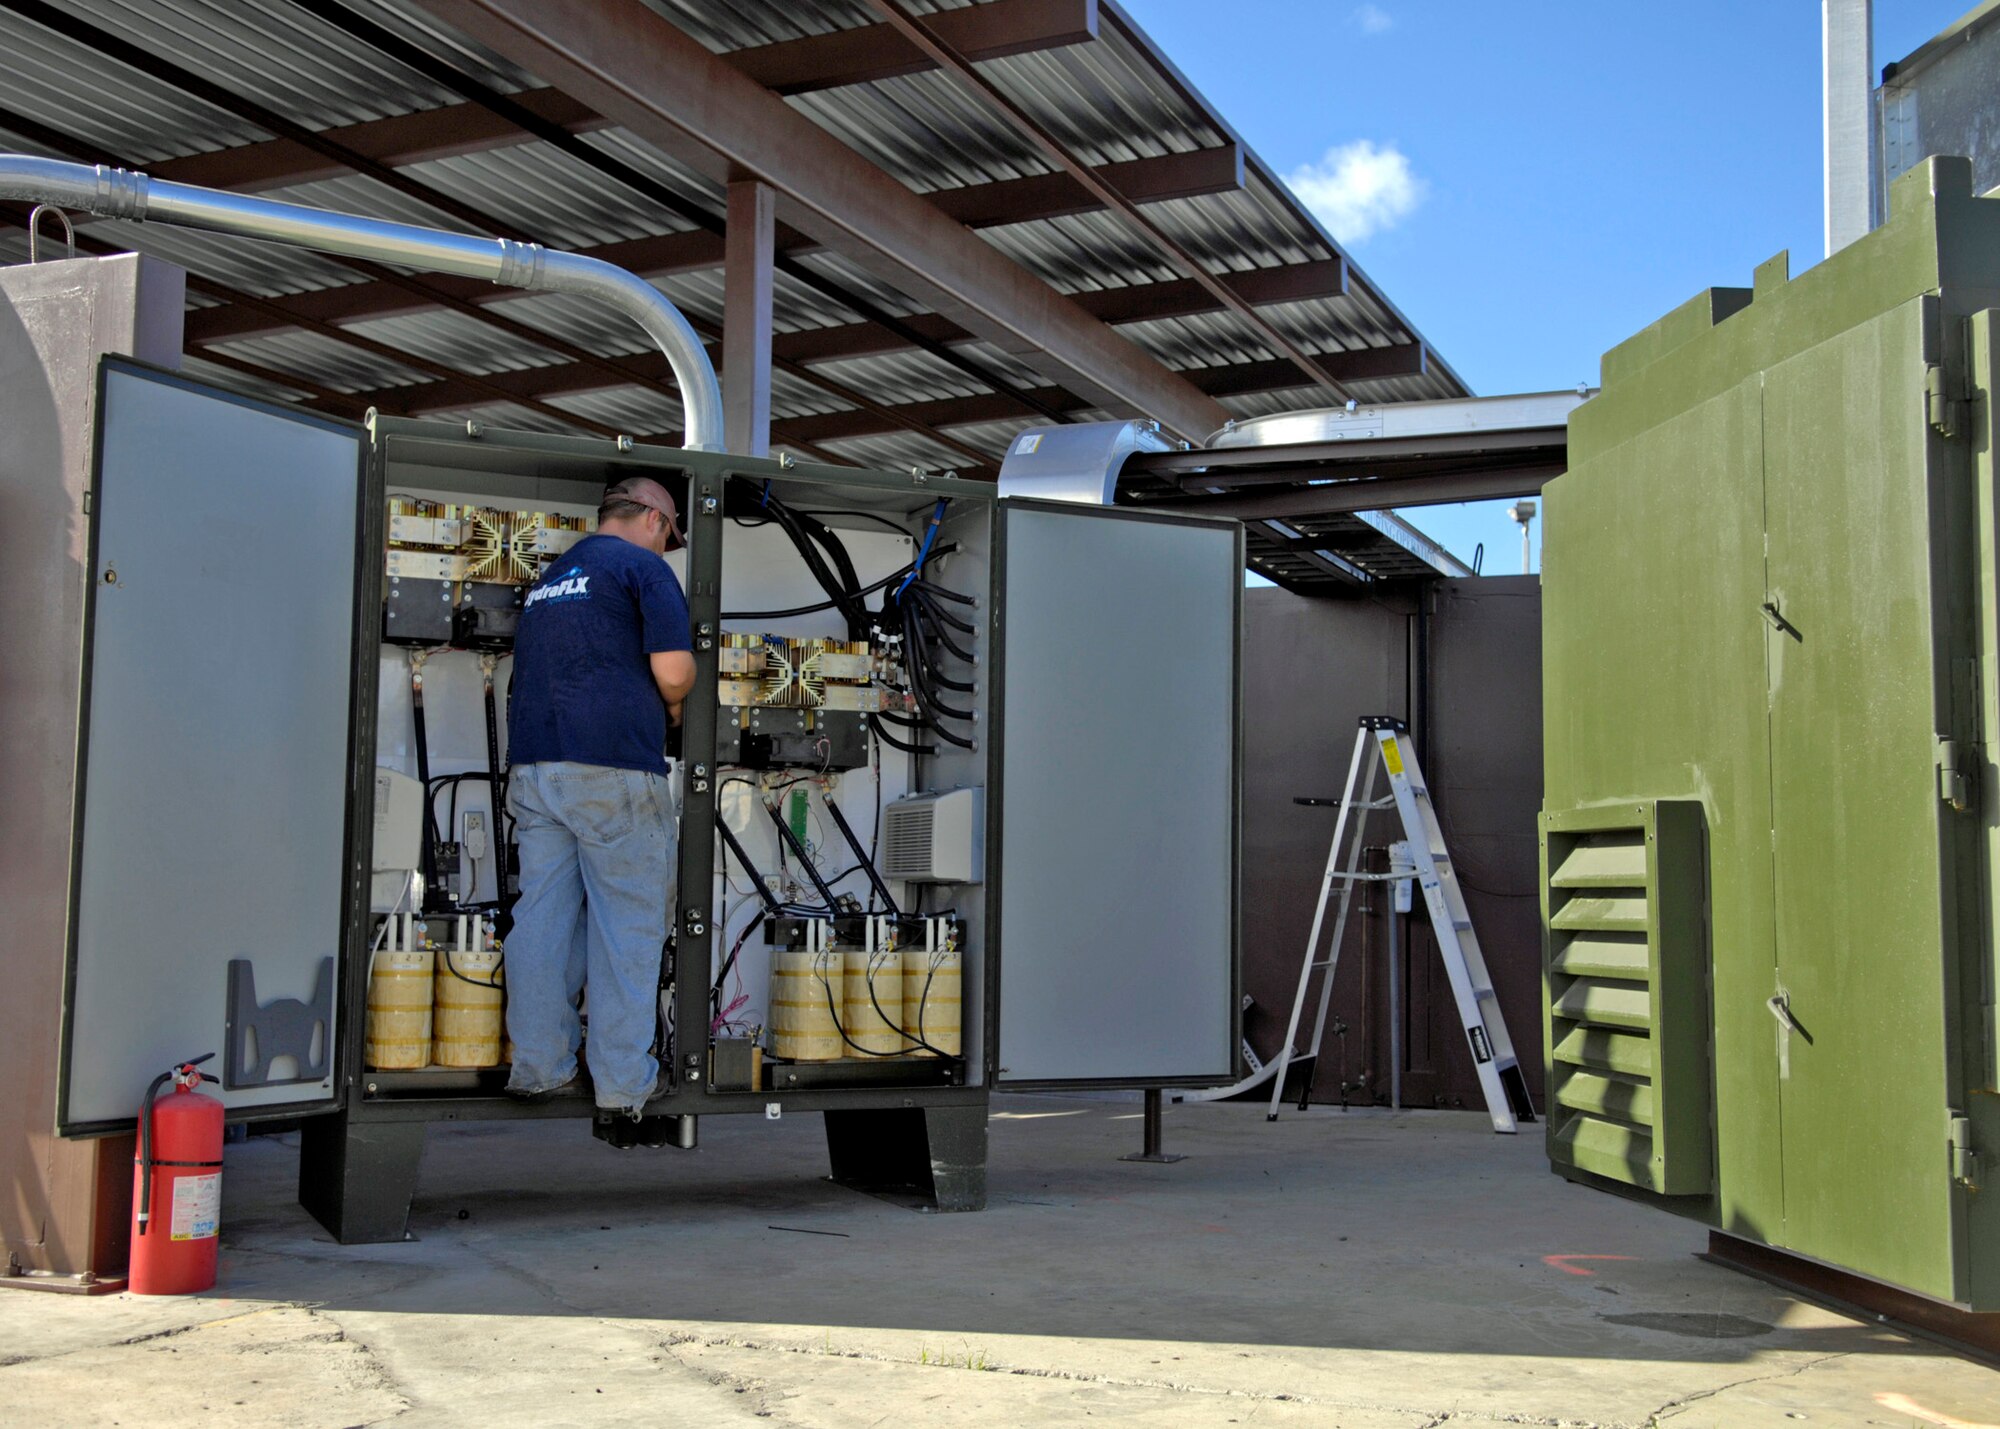 Matthew Morse lands power leads for the water purification system on the power supply for the HydraFLX System at Hickam Air Force Base, Hawaii Oct. 27, 2006. Morse is program engineer for HydraFLX Systems LLC. The HydraFLX System is being tested by the Air Force as an alternate energy source. It will generate ultra-pure H2 (hydrogen) from water in a flexible pressure management process for fueling buses, tow-tractors, vans, sedans and ground support equipment. The system can also be deployed anywhere and operate in hostile theaters without infrastructure or pipelines. (U.S. Air Force photo/Tech. Sgt. Shane A. Cuomo)
